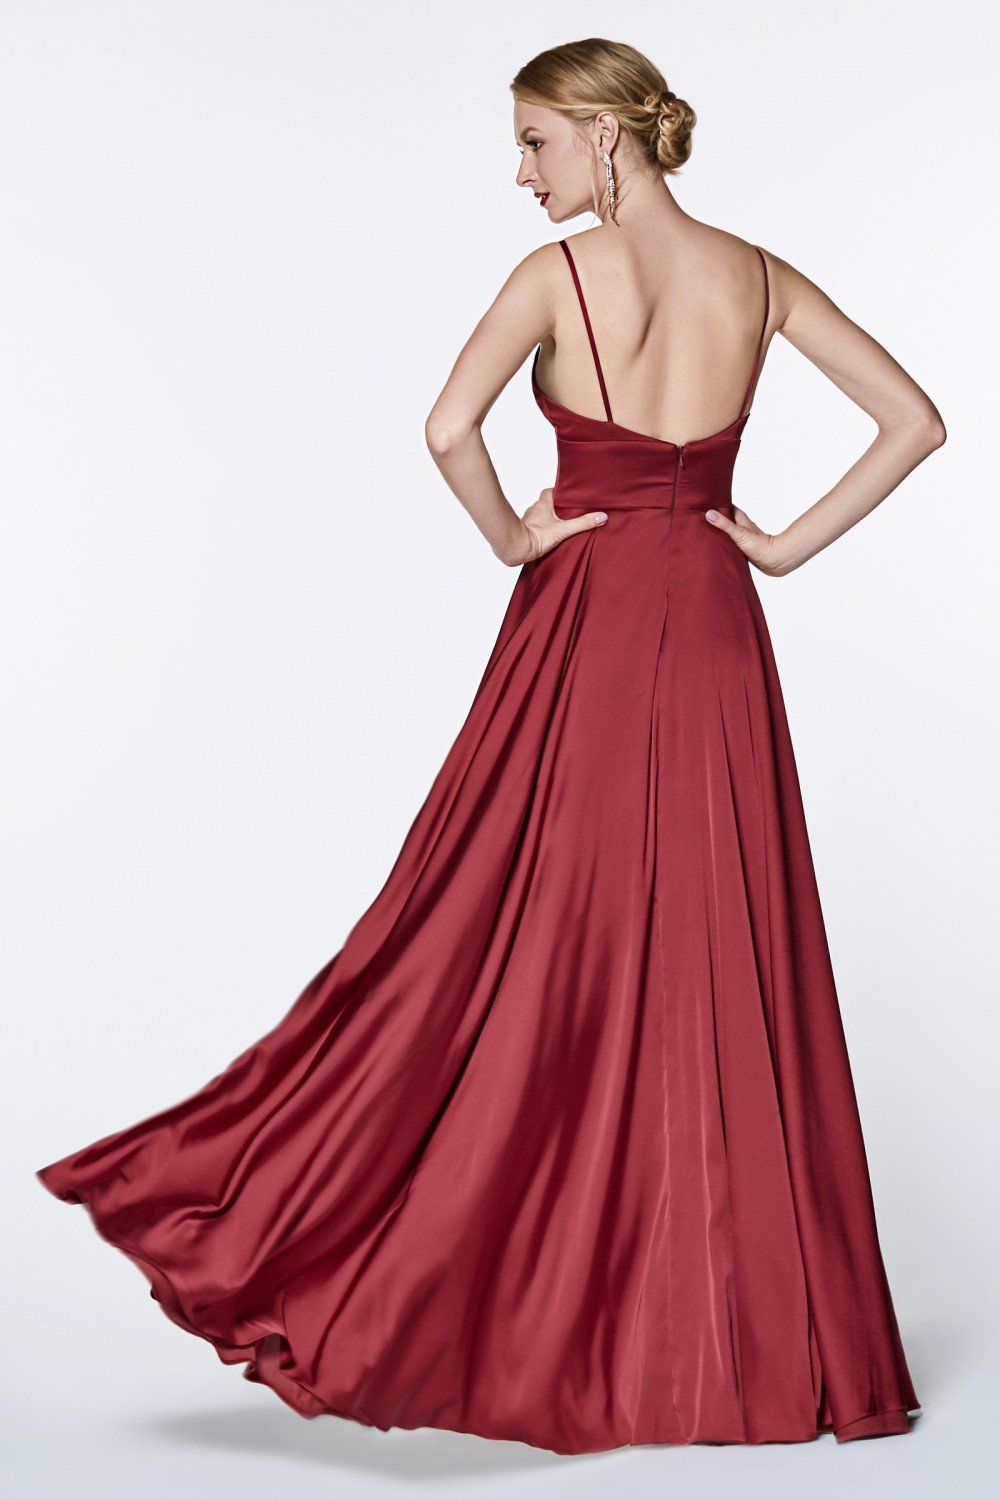 Cinderella Divine - Sheer Plunging Neck Double Slit Satin Gown CJ526 In Red